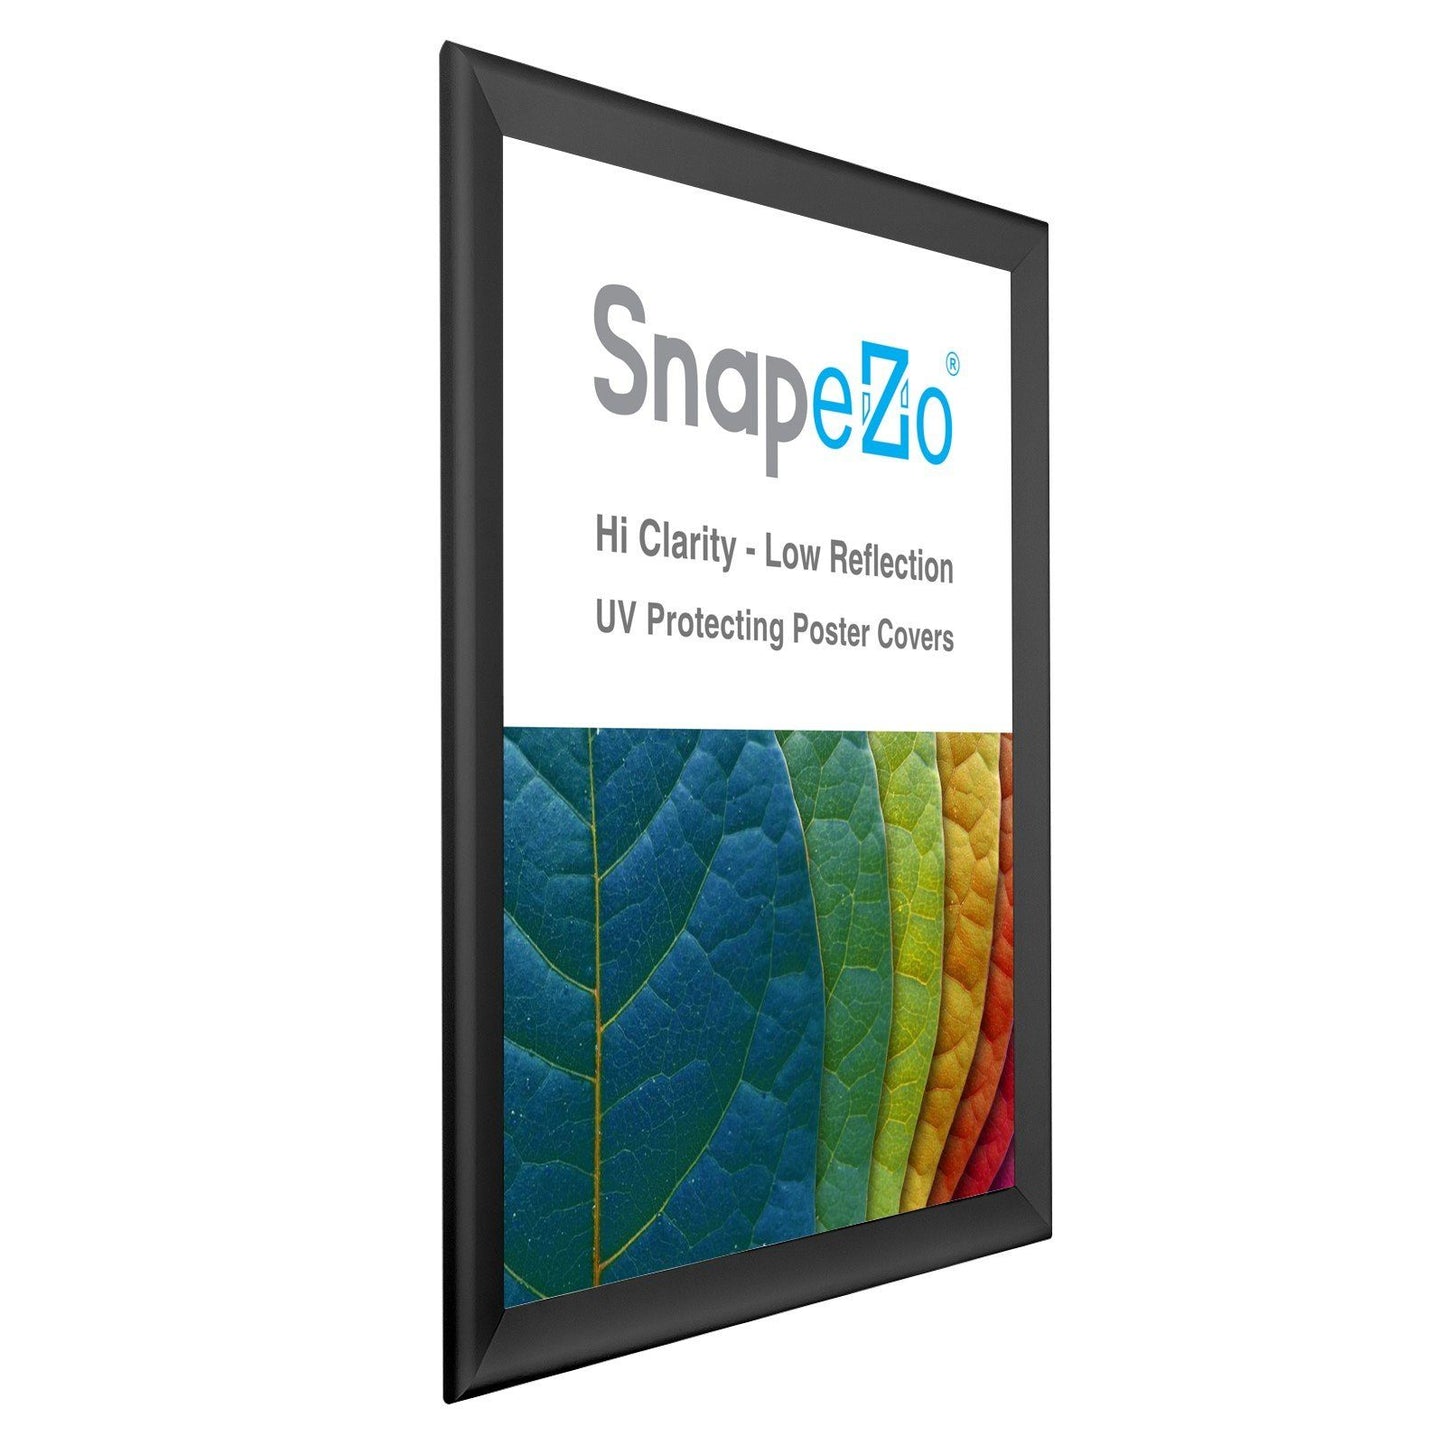 Load image into Gallery viewer, 18x24 Black SnapeZo® Snap Frame - 1.7 Inch Profile
